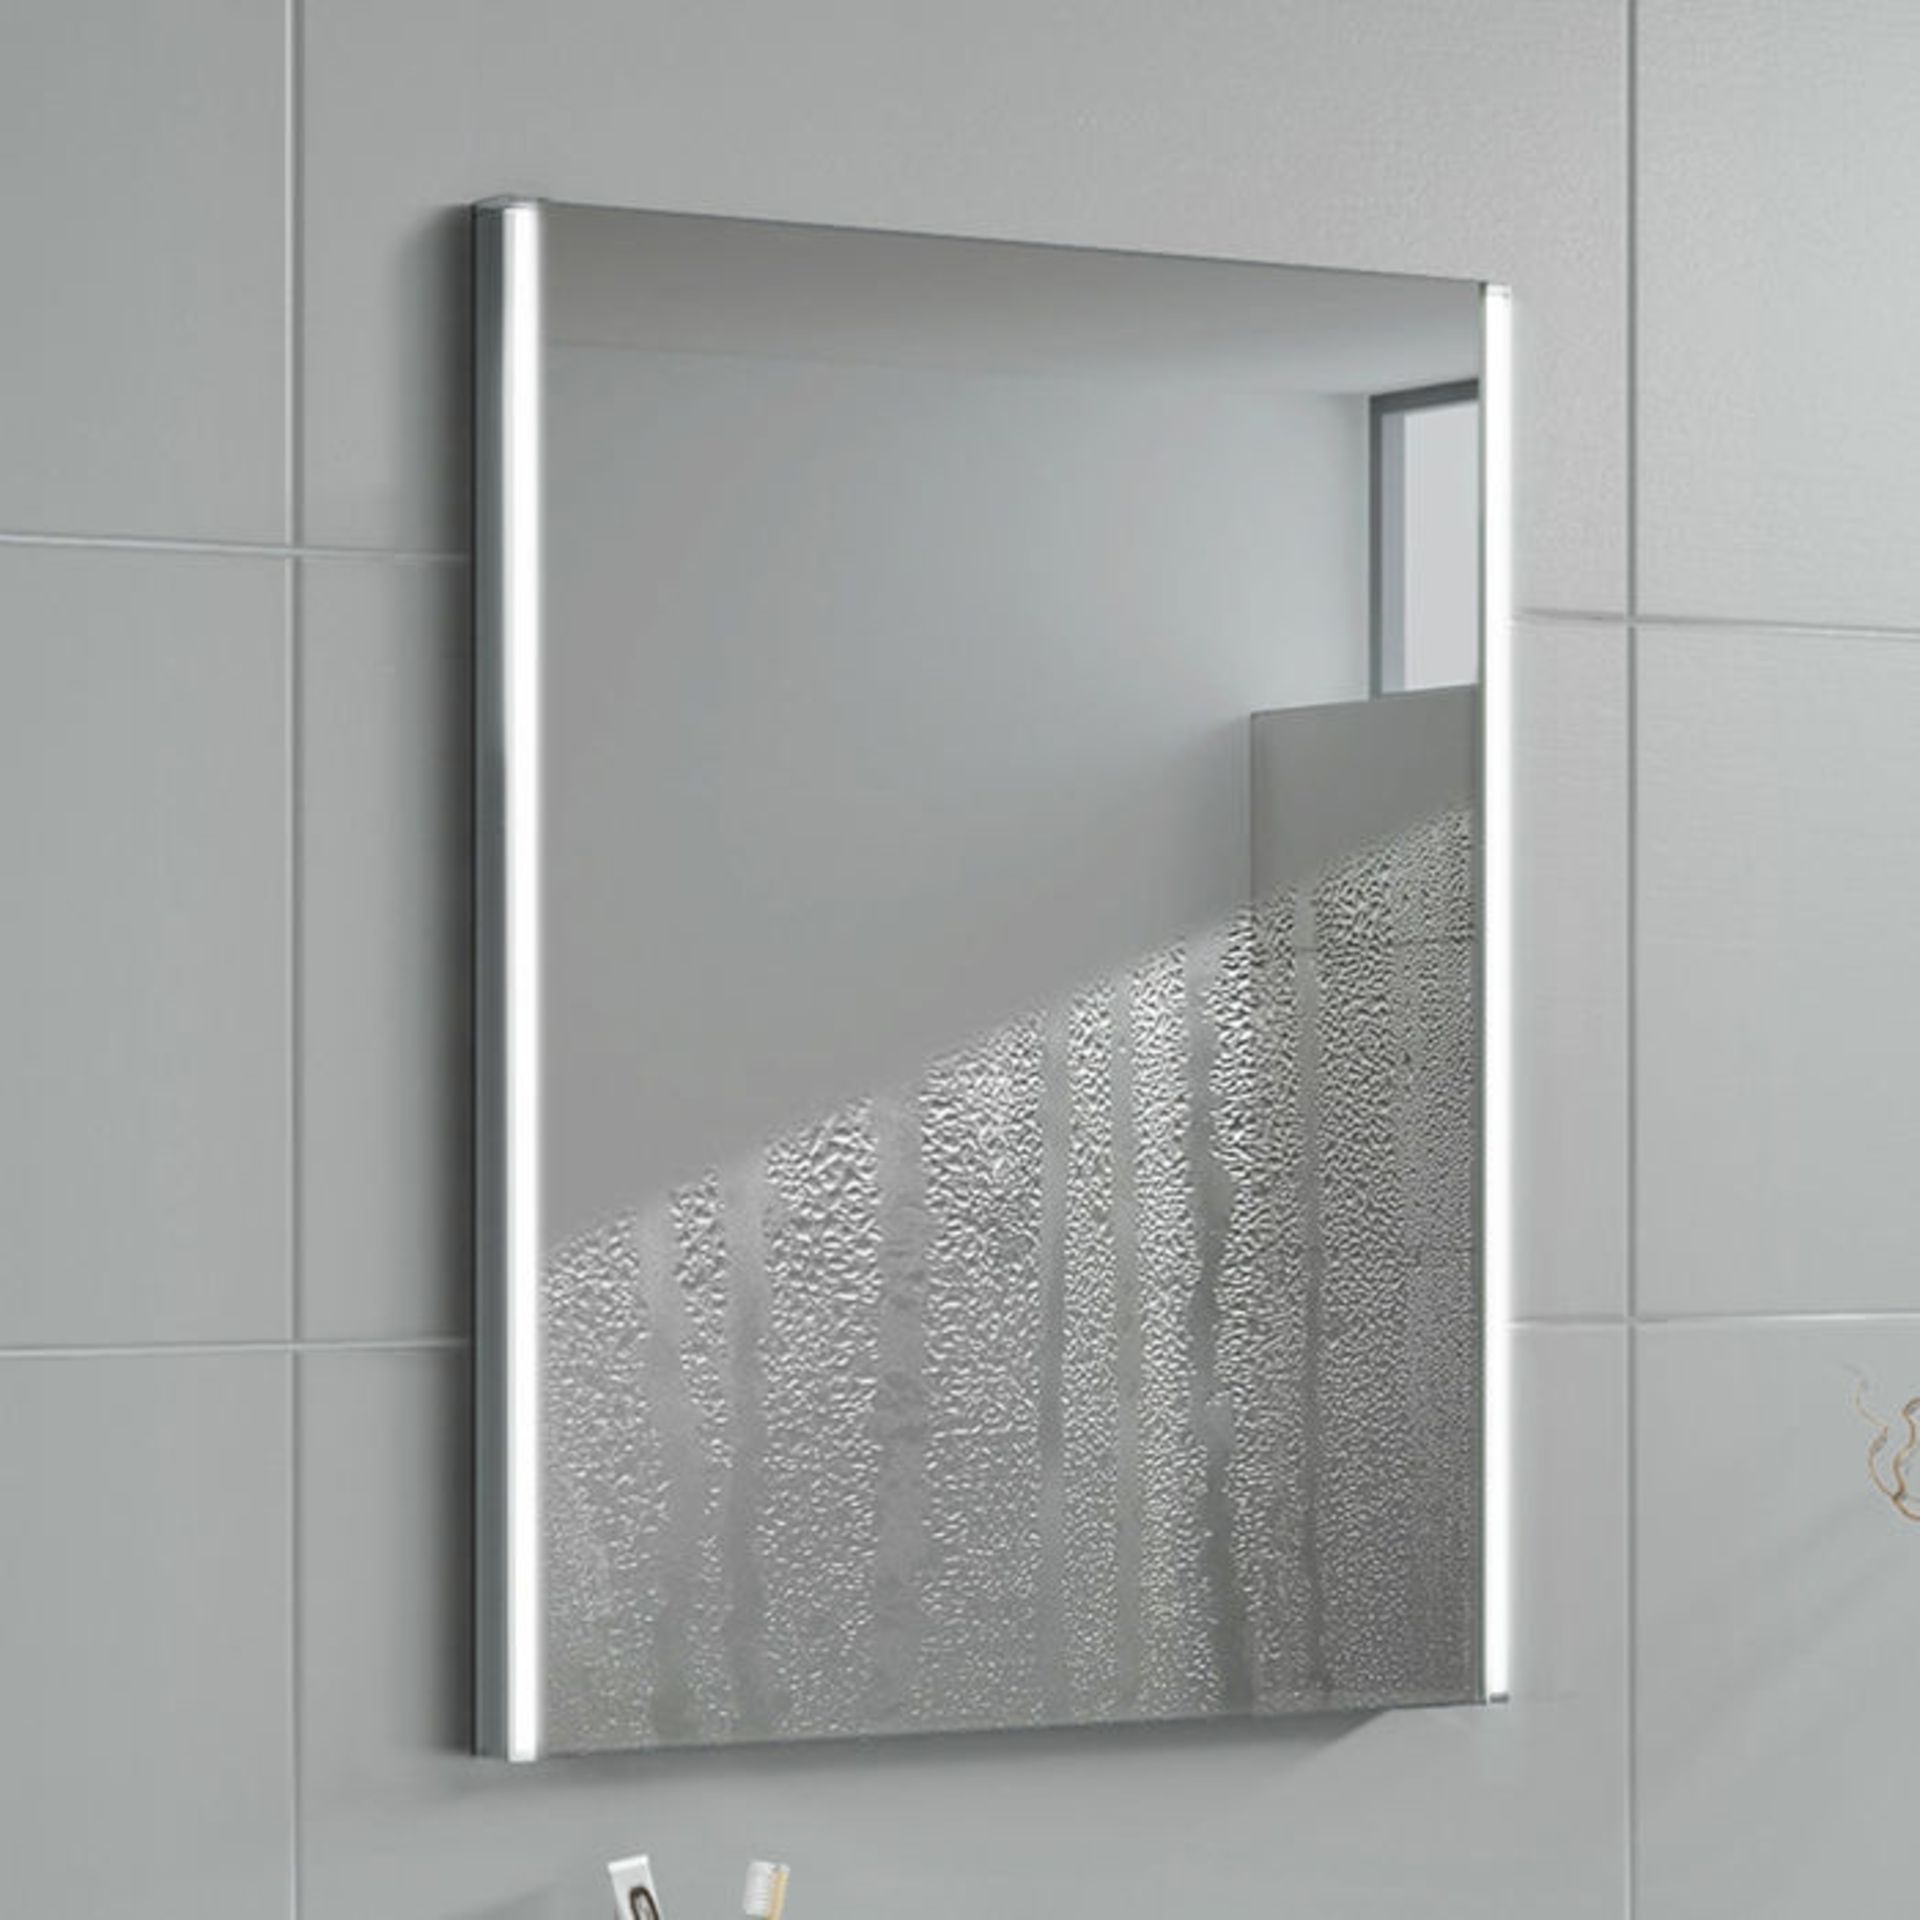 (LP131) 450x600mm Denver Illuminated LED Mirror. RRP £349.99. Energy efficient LED lighting with - Image 3 of 5